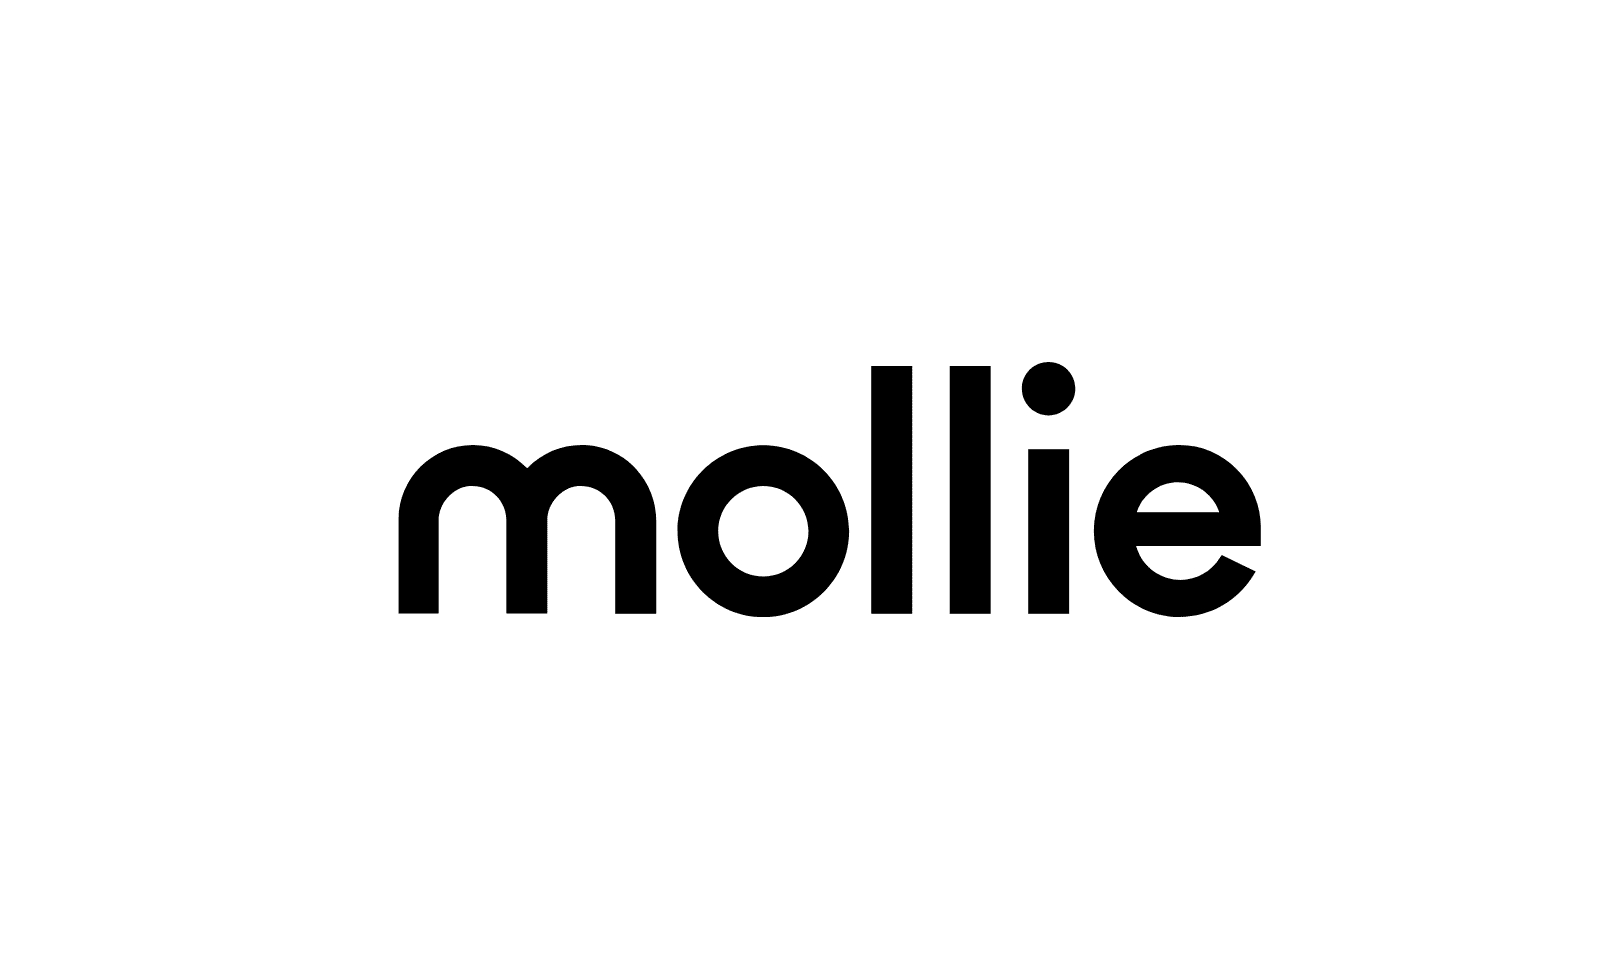 Mollie Launches 1 Million Euro Acceleration Fund for Developers, Start-ups and Digital Agencies